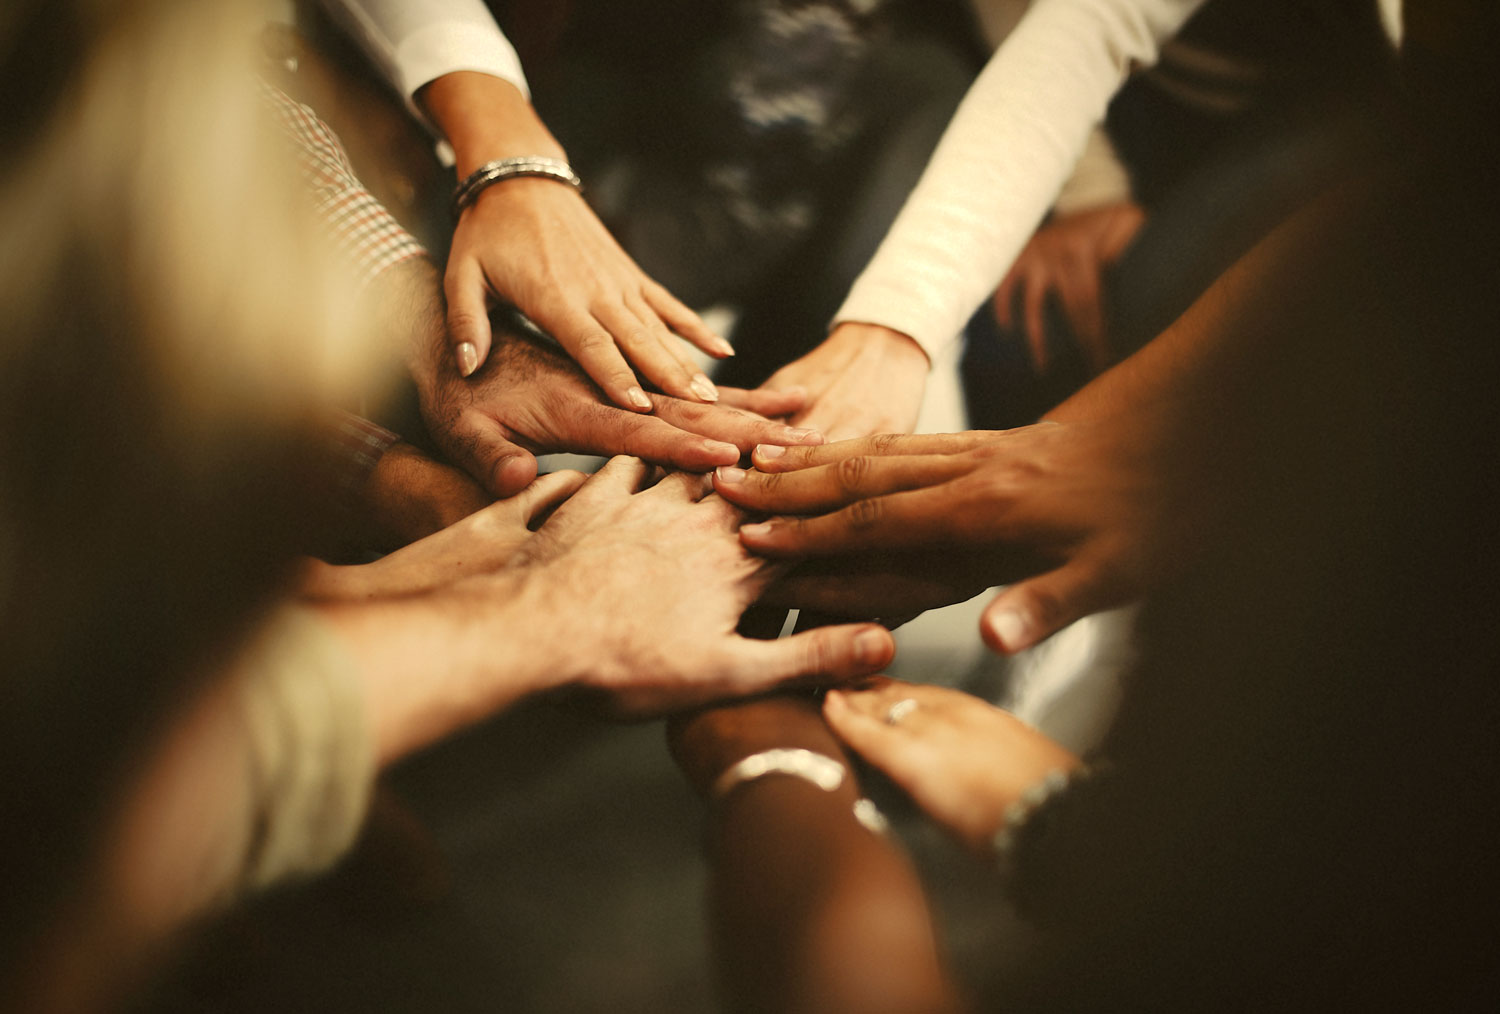 A group of hands all placed on top of one another. The hands have different skin tones.